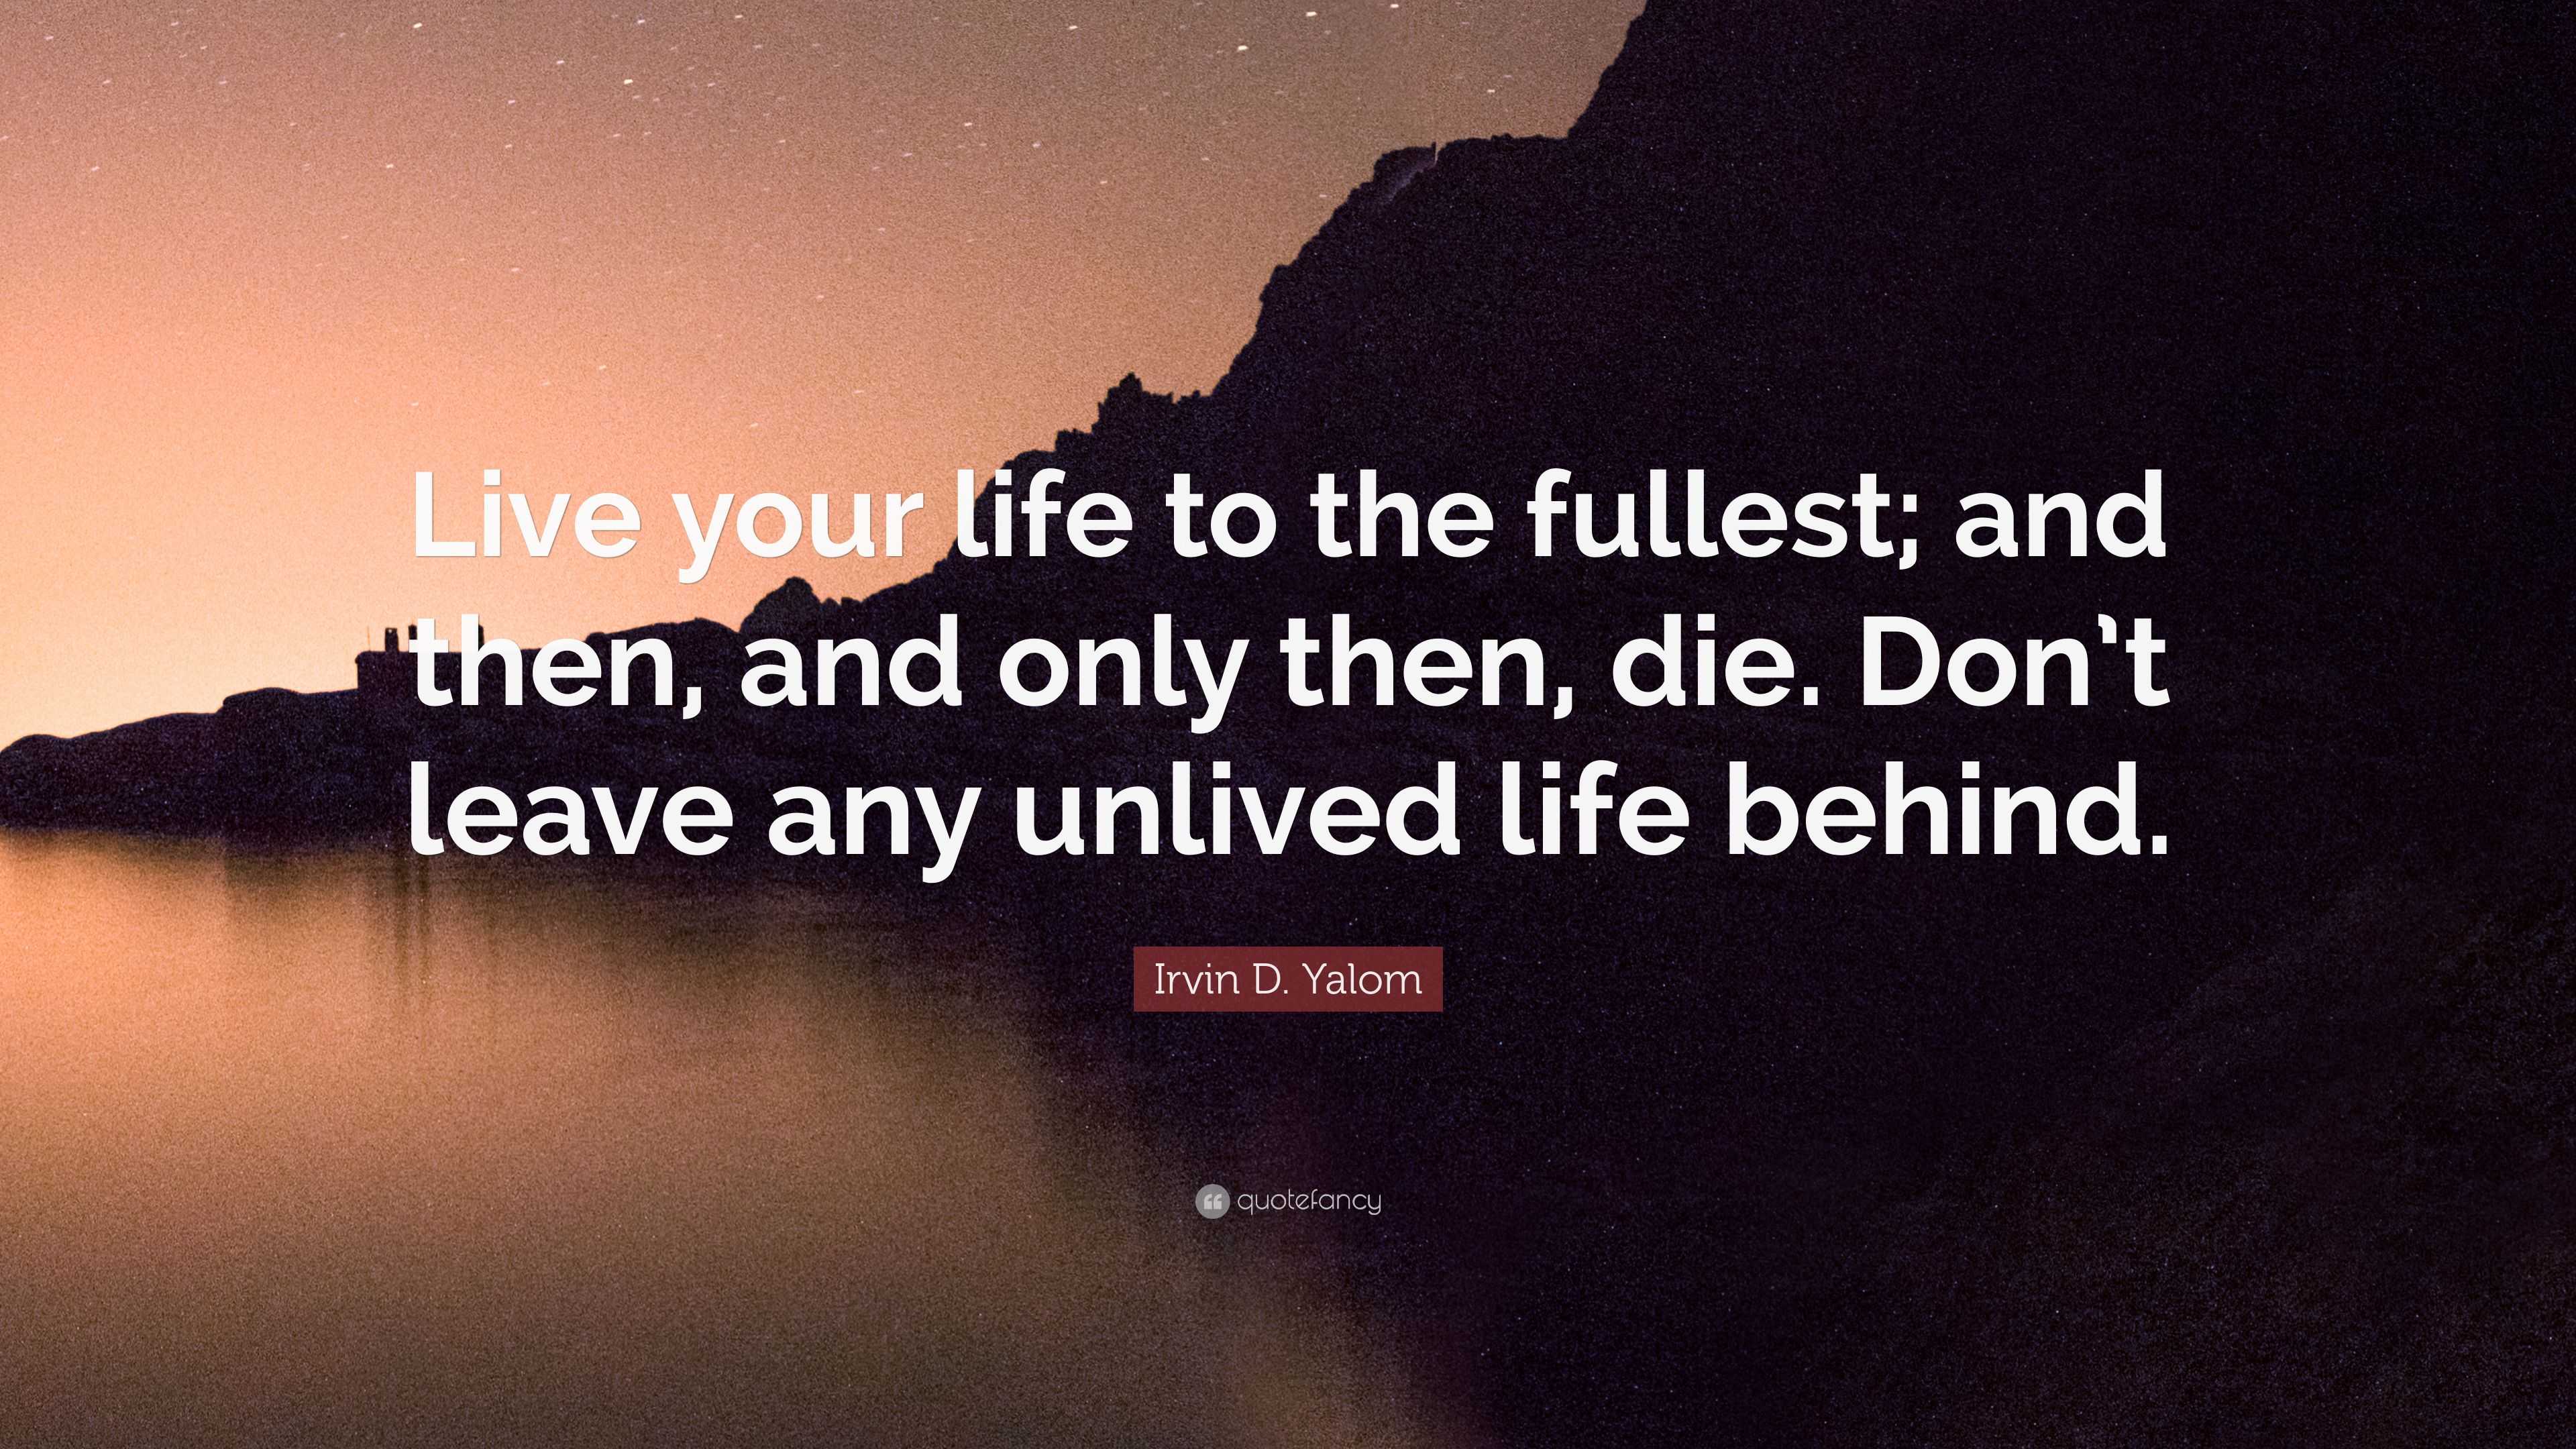 Irvin D. Yalom Quote: “Live your life to the fullest; and then, and ...